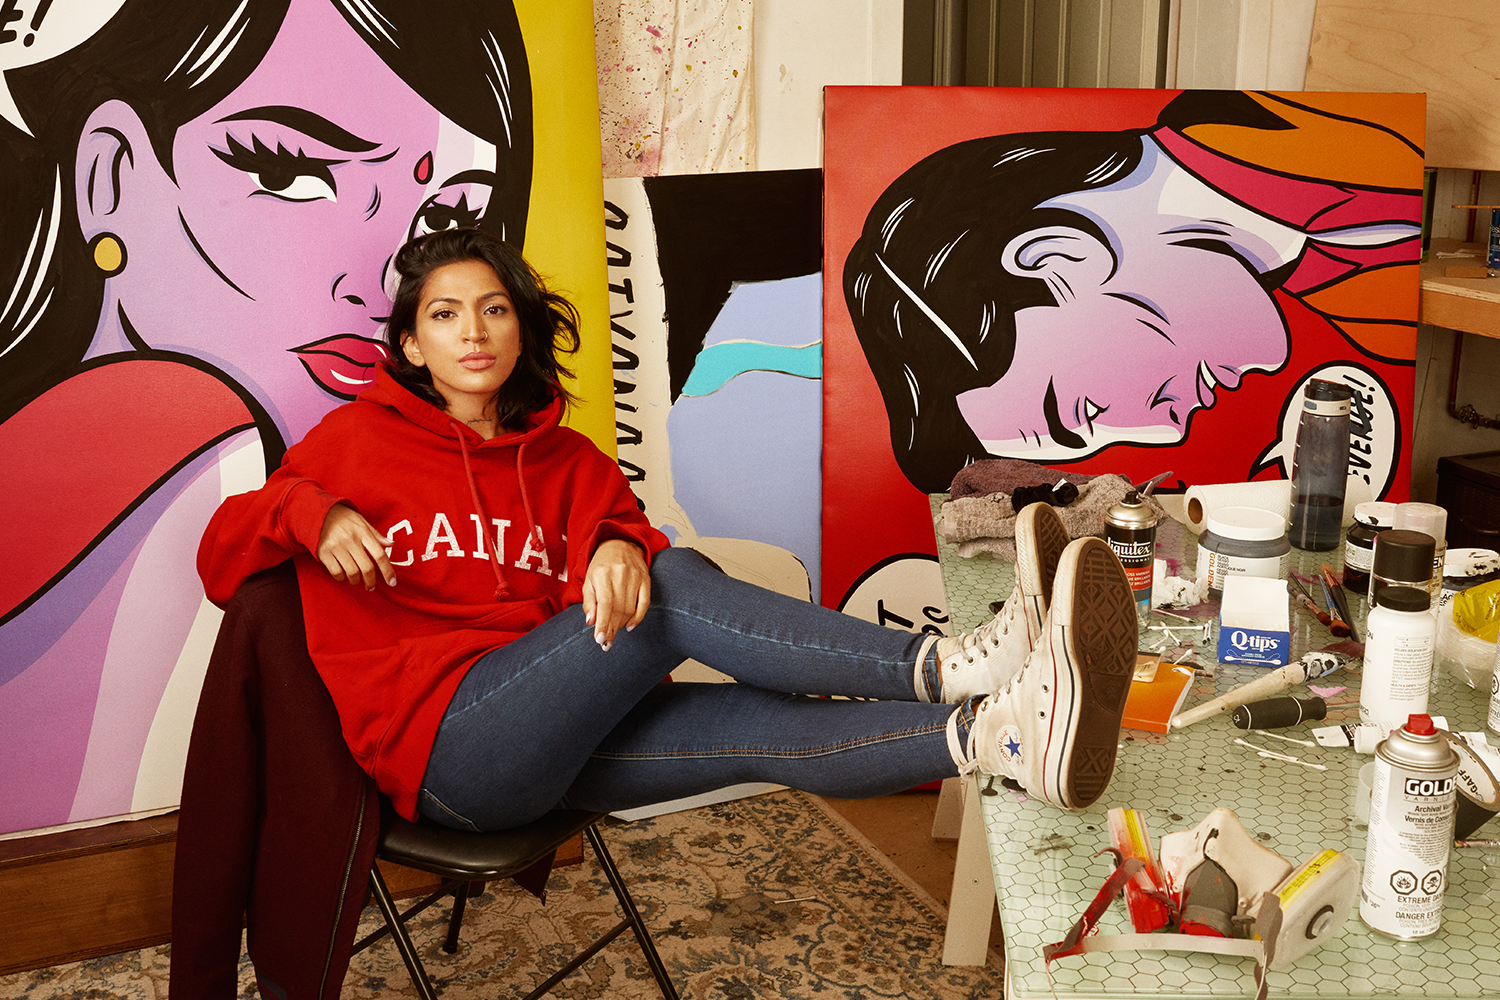 A photo of Maria Qamar, known as Hatecopy, with her artwork